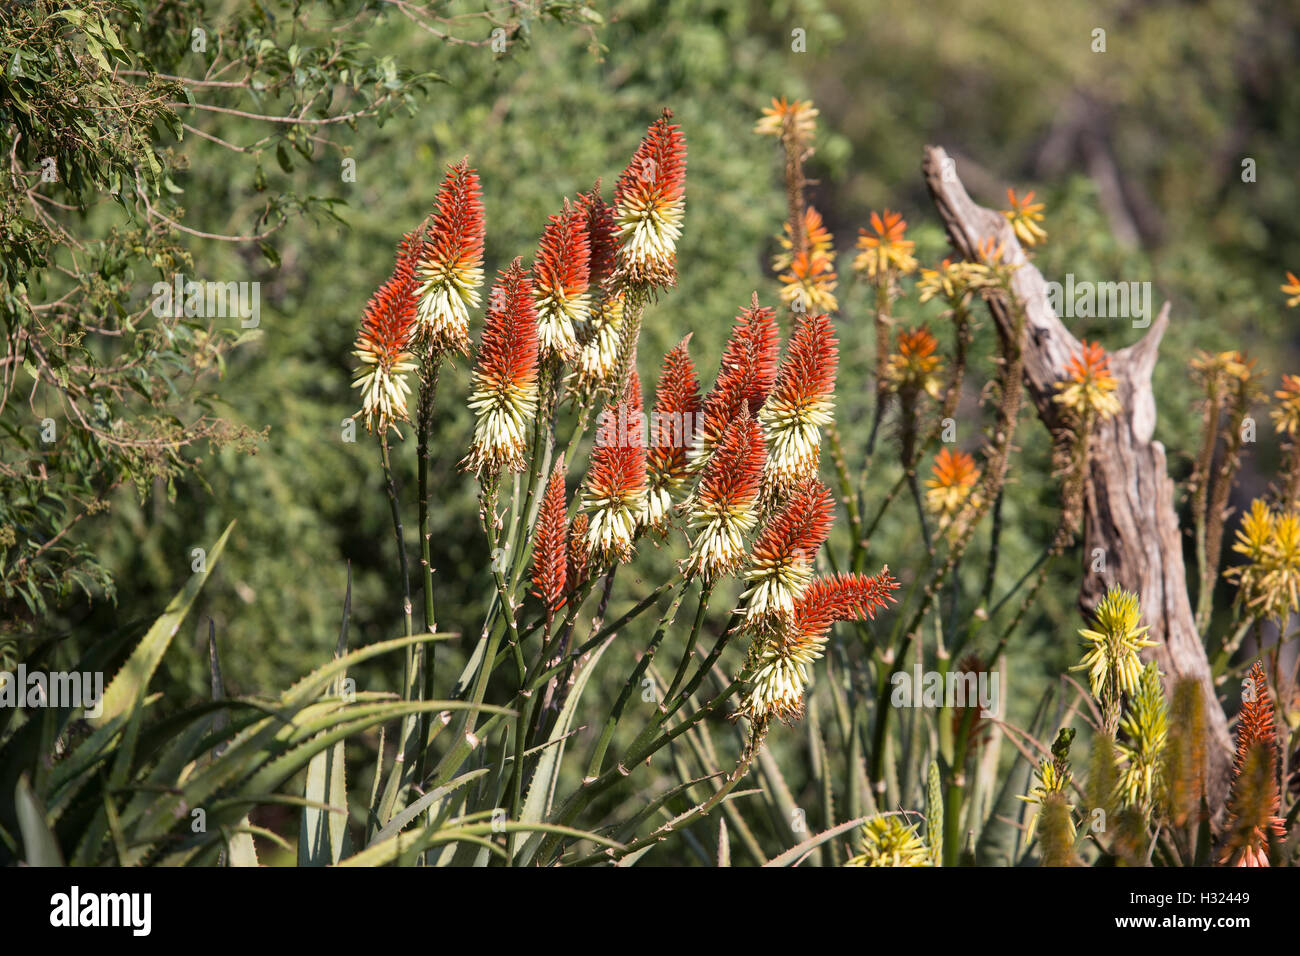 A collection of Aloe plants flowering in South Africa where clusters of yellow, orange or red tubular flowers, angle downwards Stock Photo